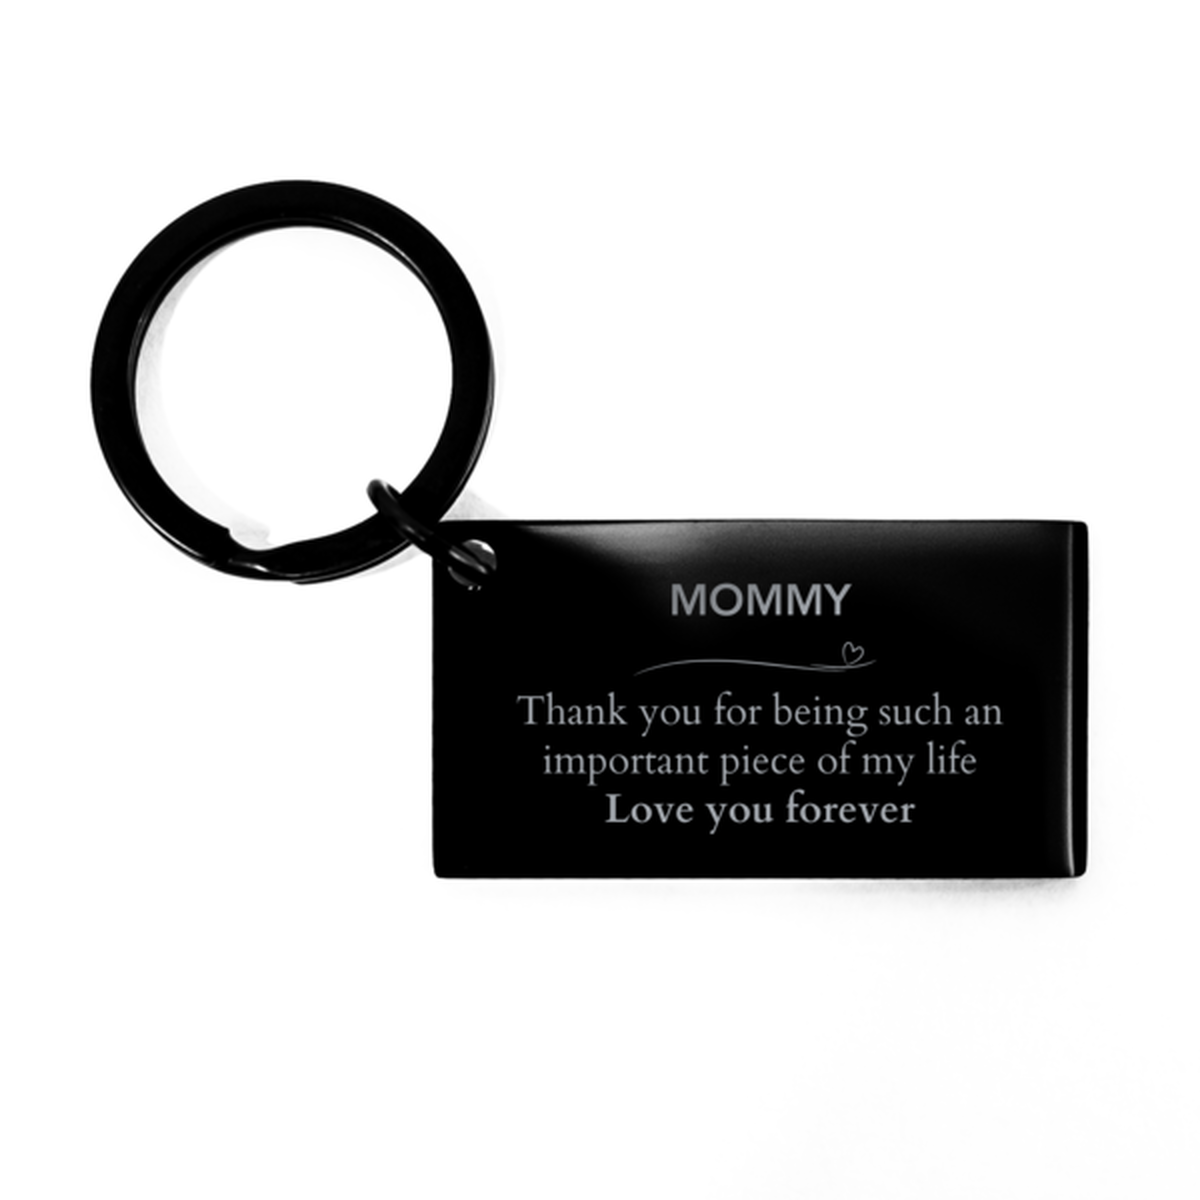 Appropriate Mommy Keychain Epic Birthday Gifts for Mommy Thank you for being such an important piece of my life Mommy Christmas Mothers Fathers Day